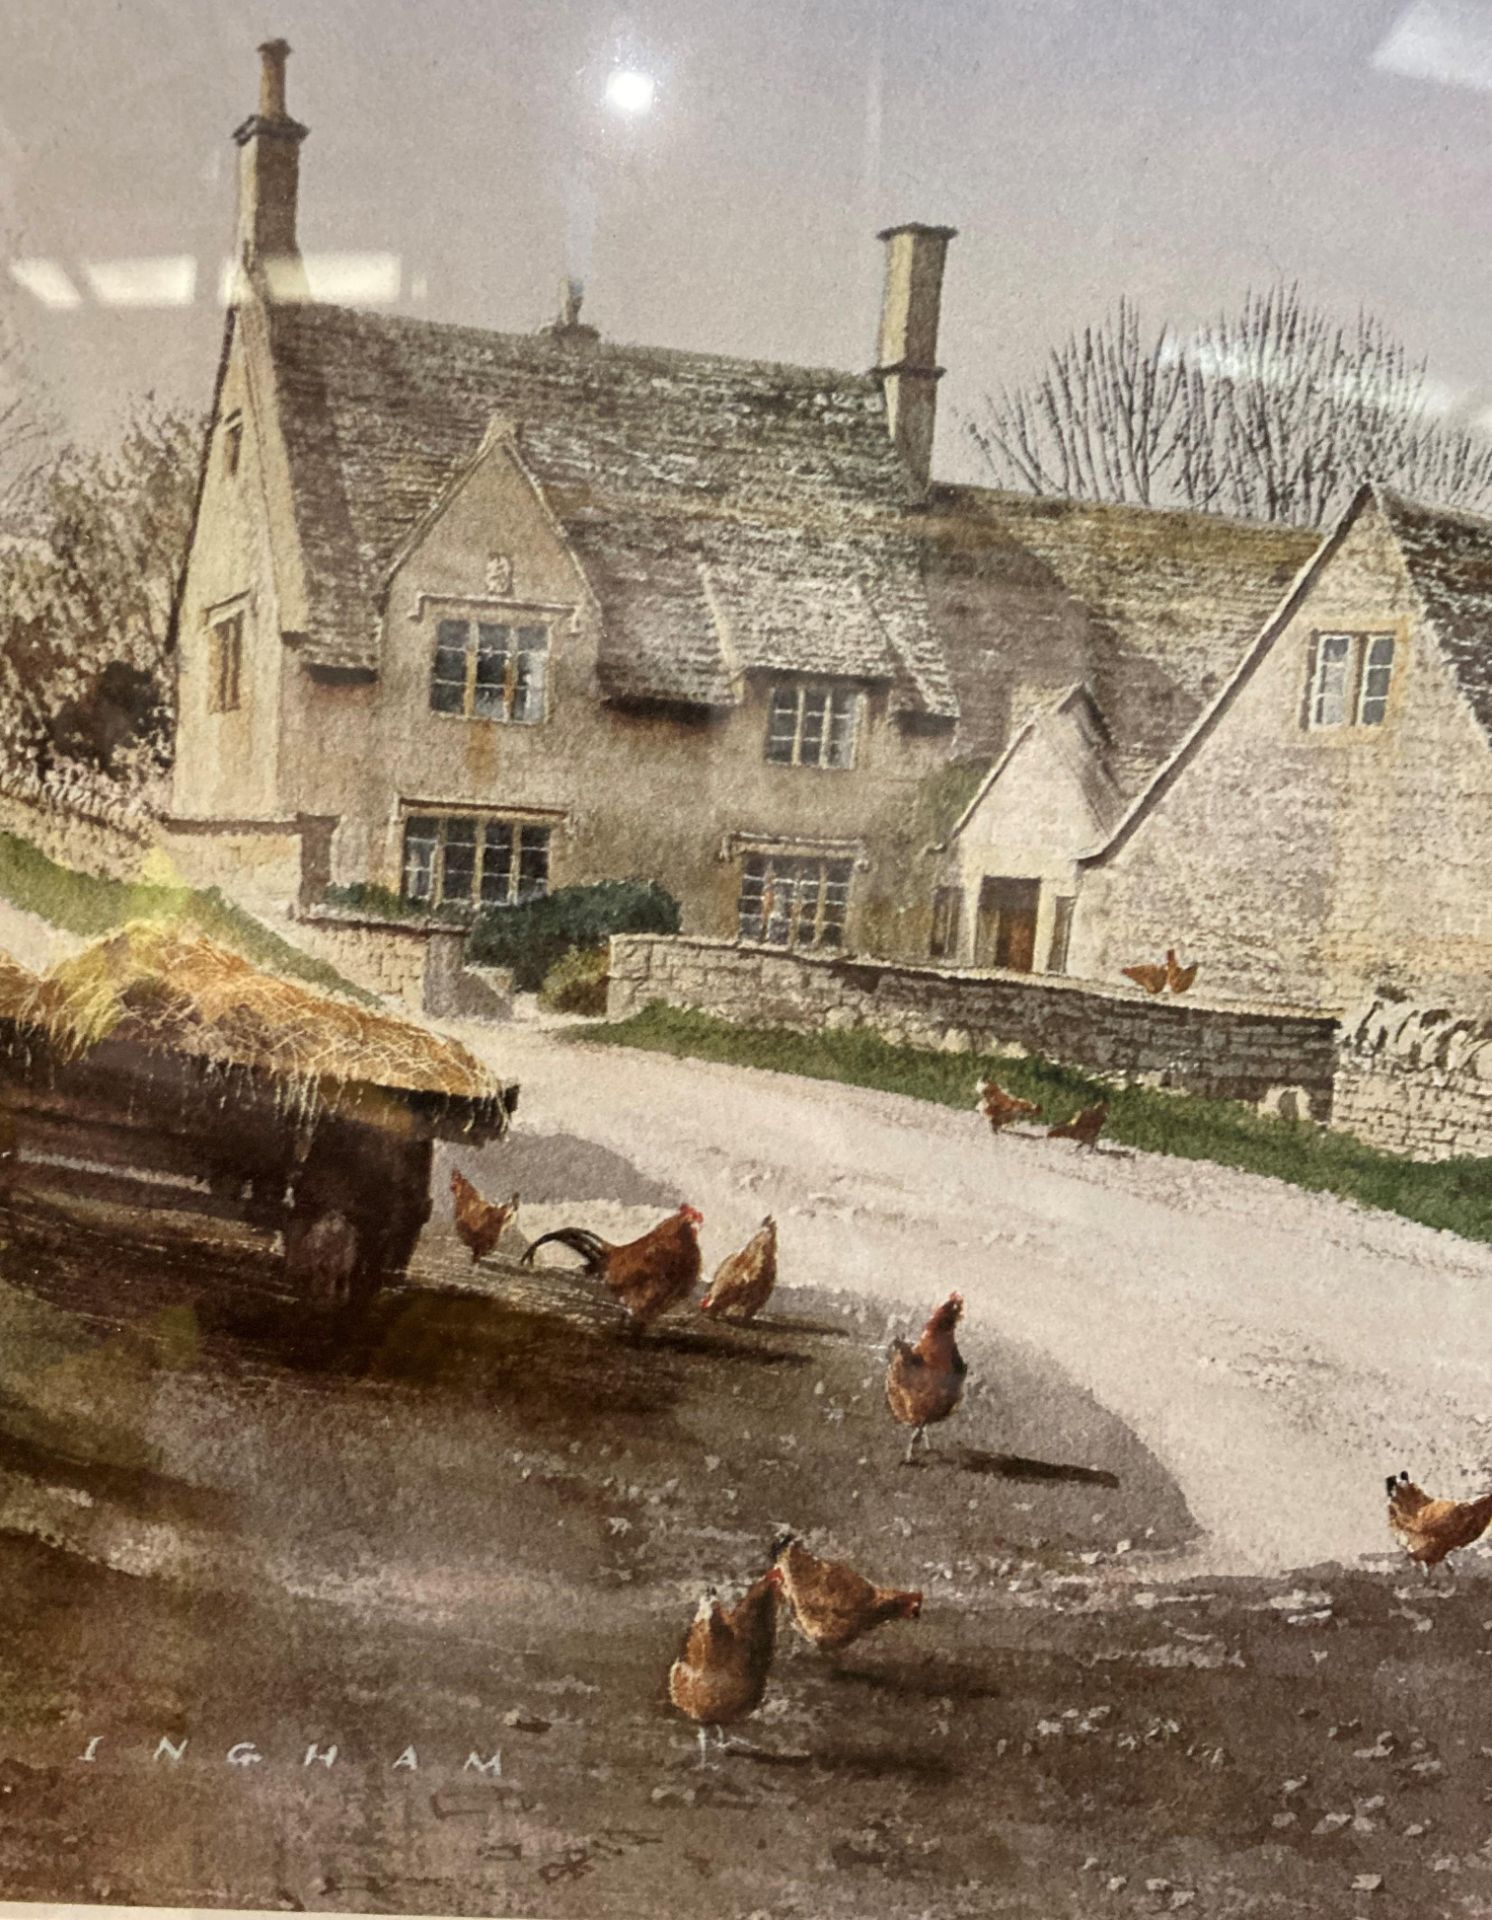 Alan Ingham, 'Farmhouse with hens in yard', print, framed, - Image 3 of 3